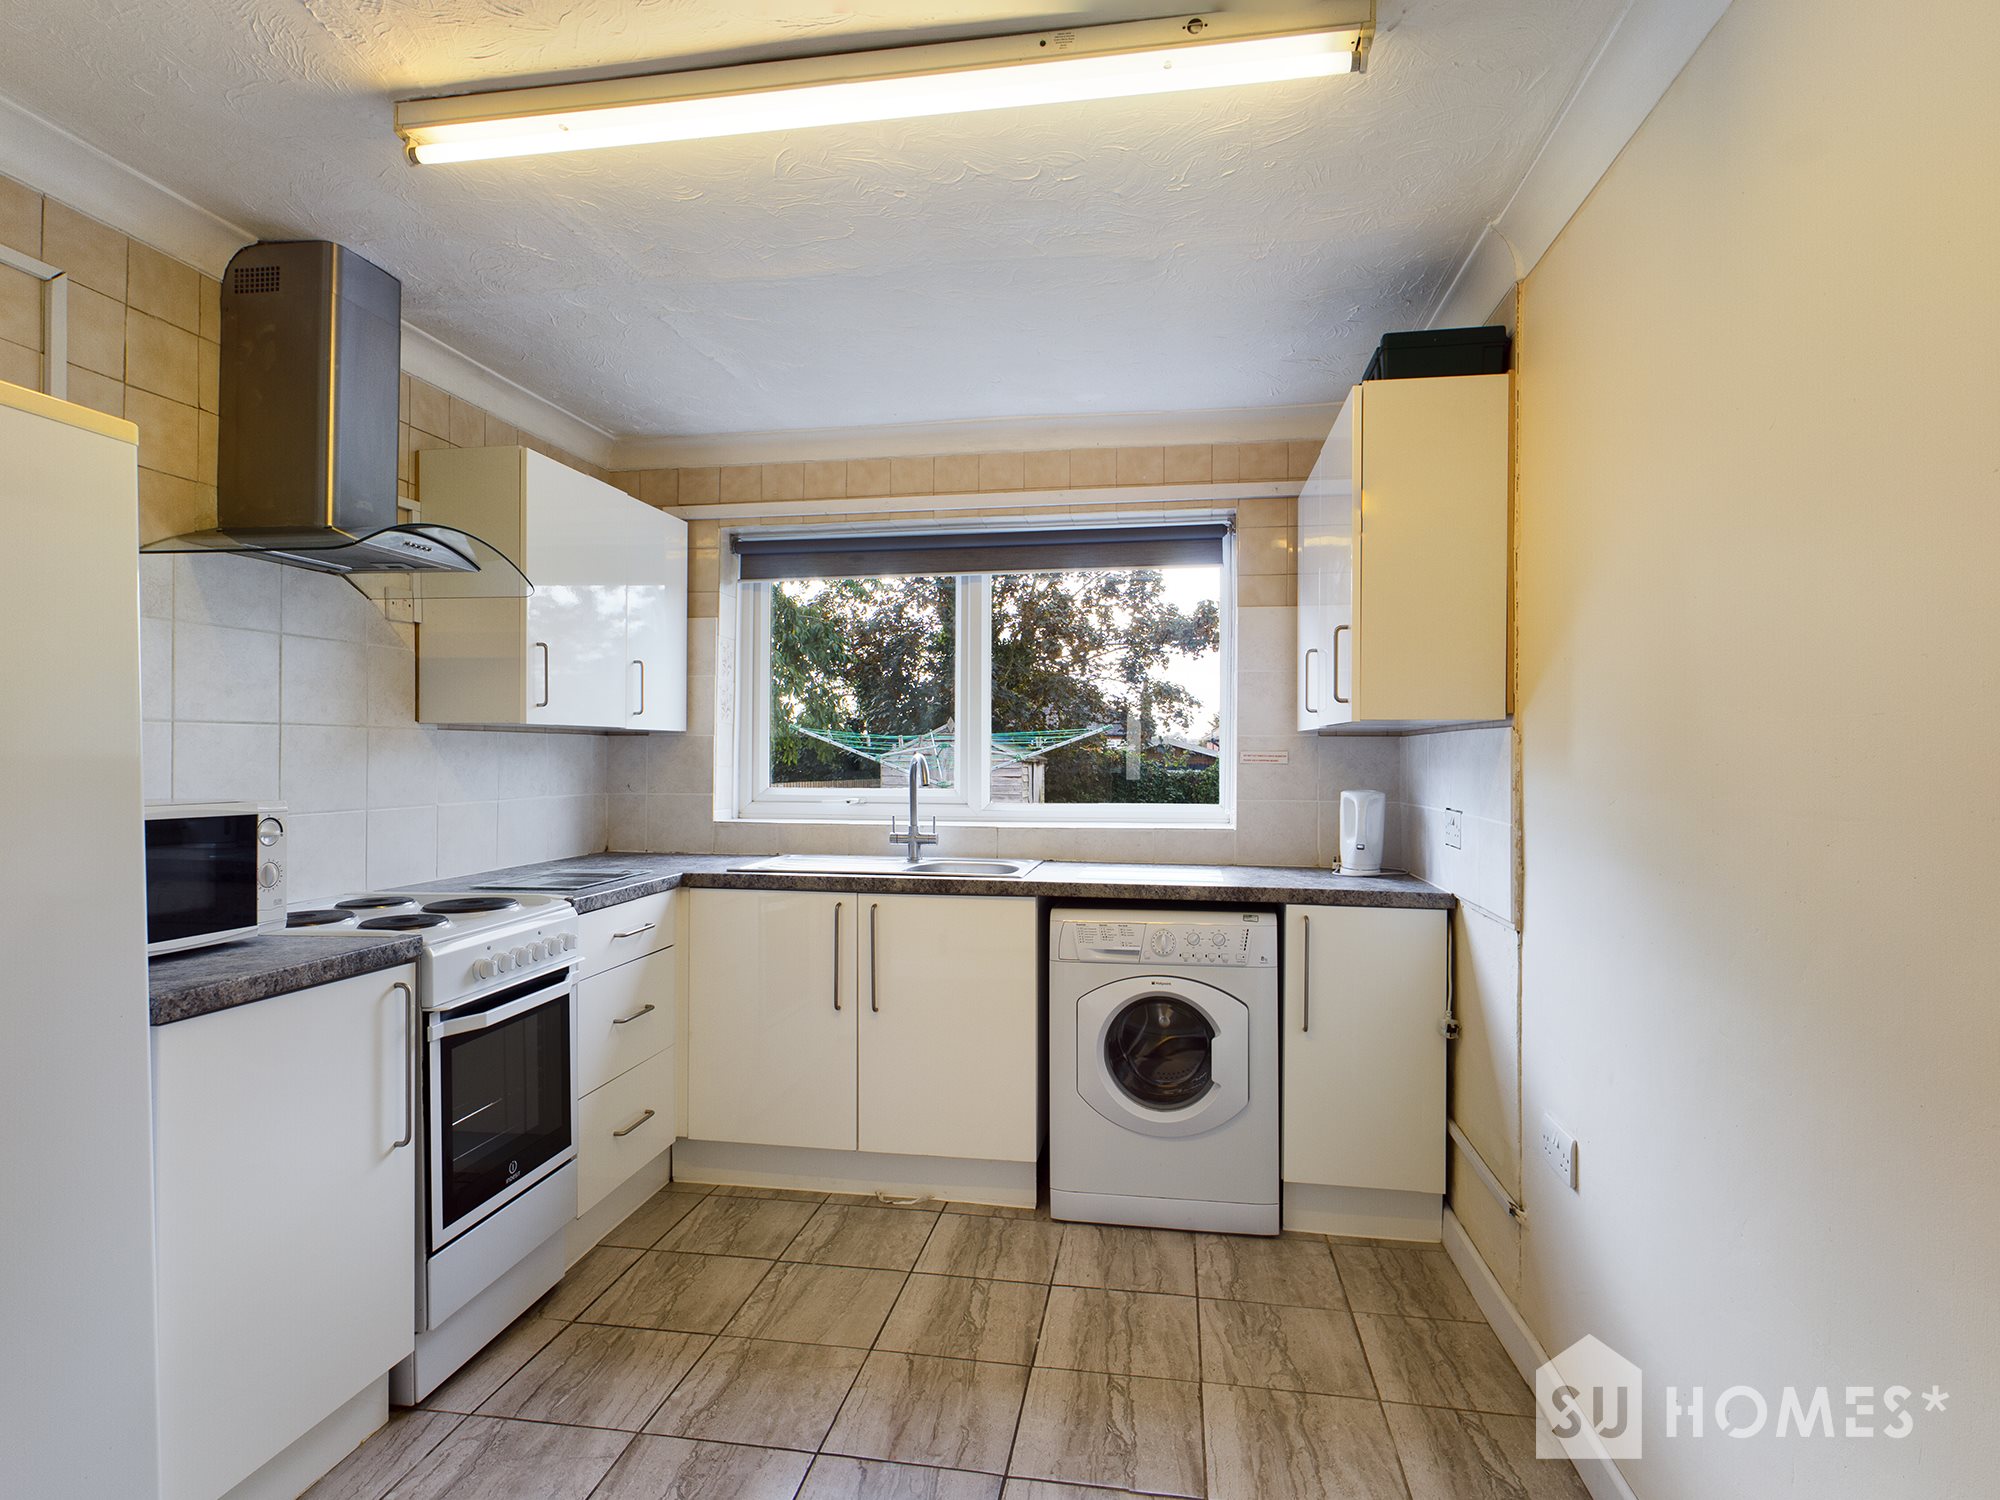 4 bed house to rent in Berrimans Close, Colchester  - Property Image 2